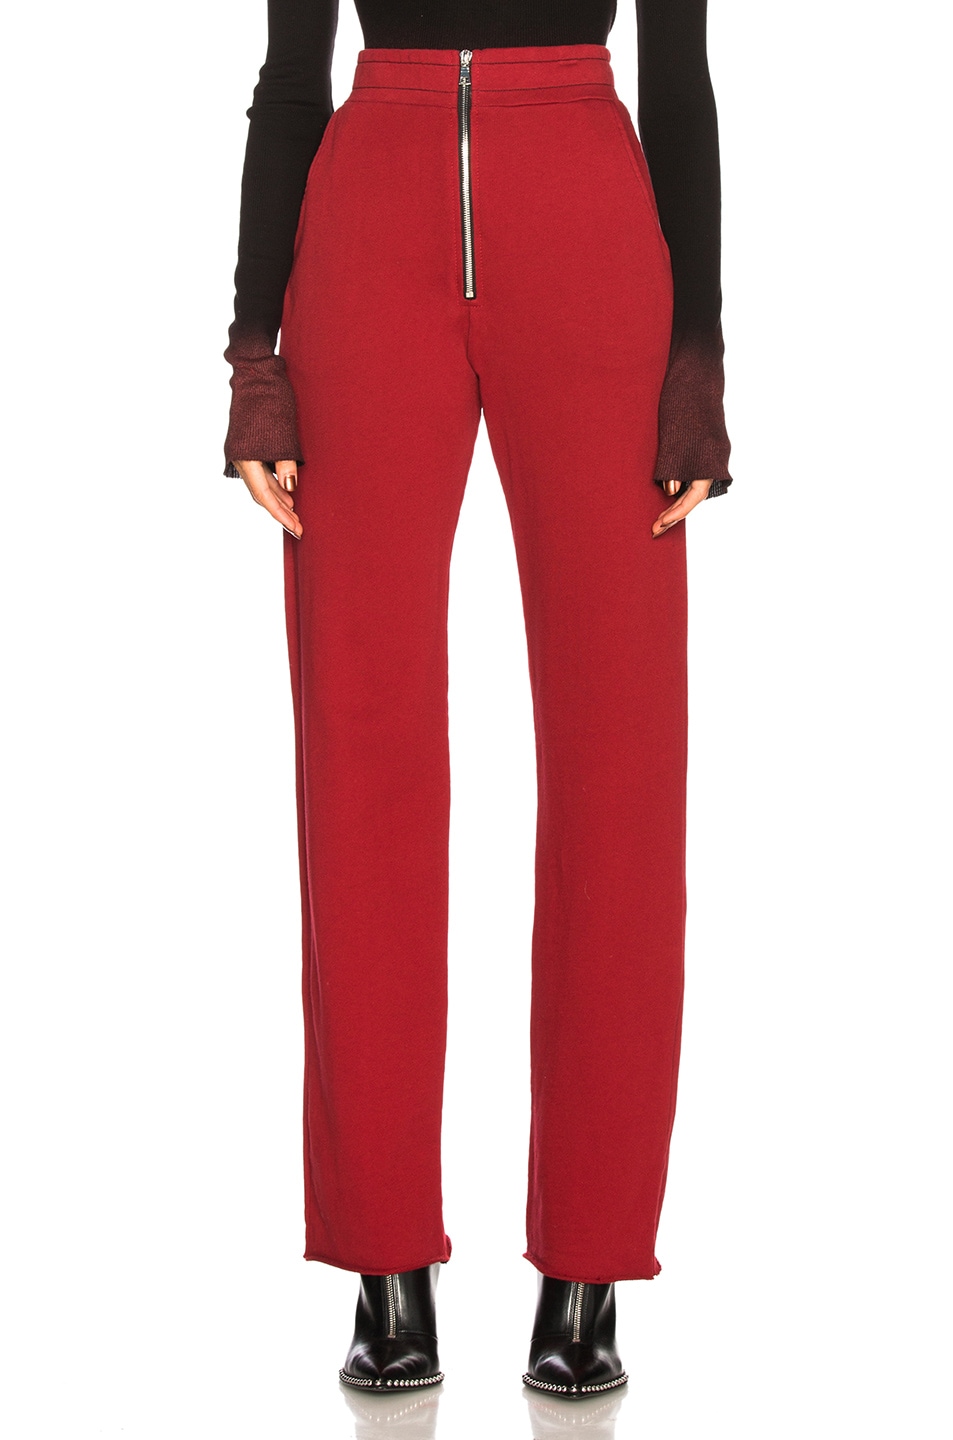 Image 1 of COTTON CITIZEN for FWRD Manhattan Sweatpant in Fire Truck Red